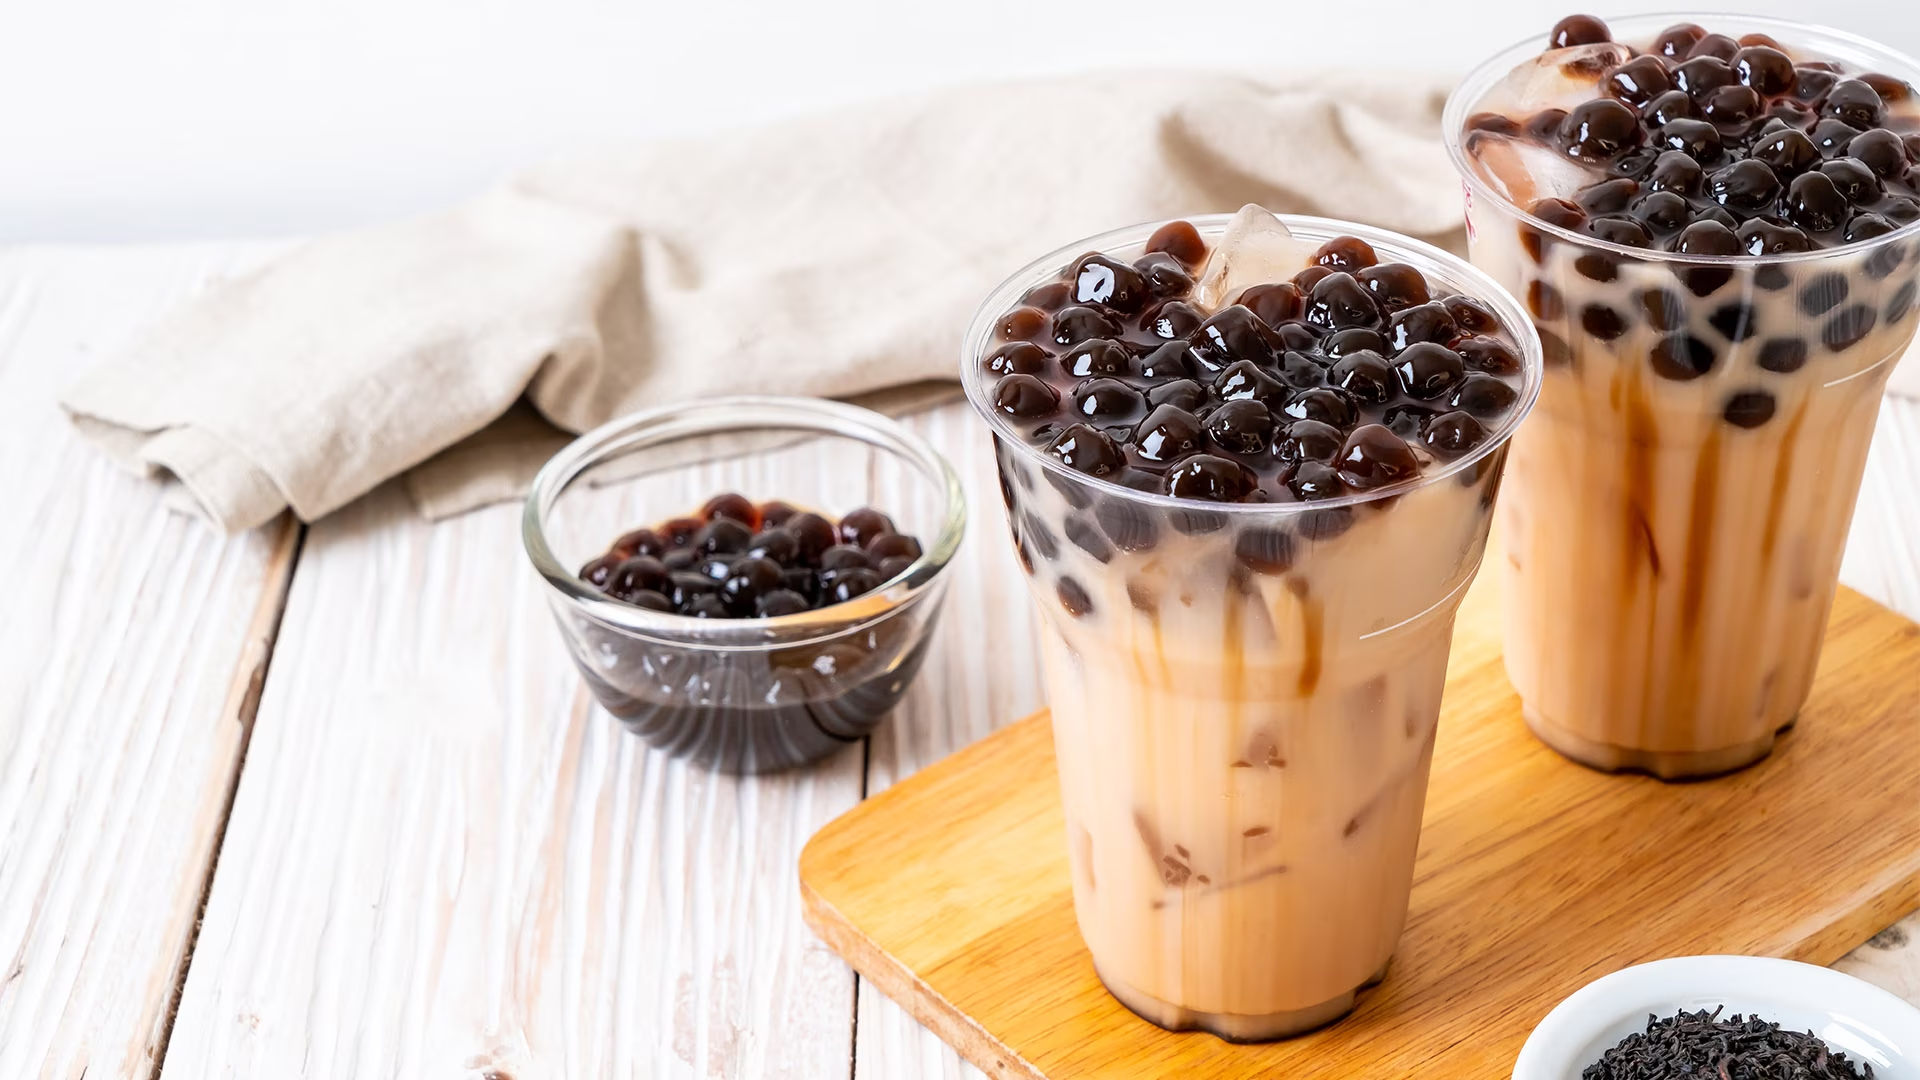 Sipping Bliss: The Ultimate Bubble Tea Experience Explored